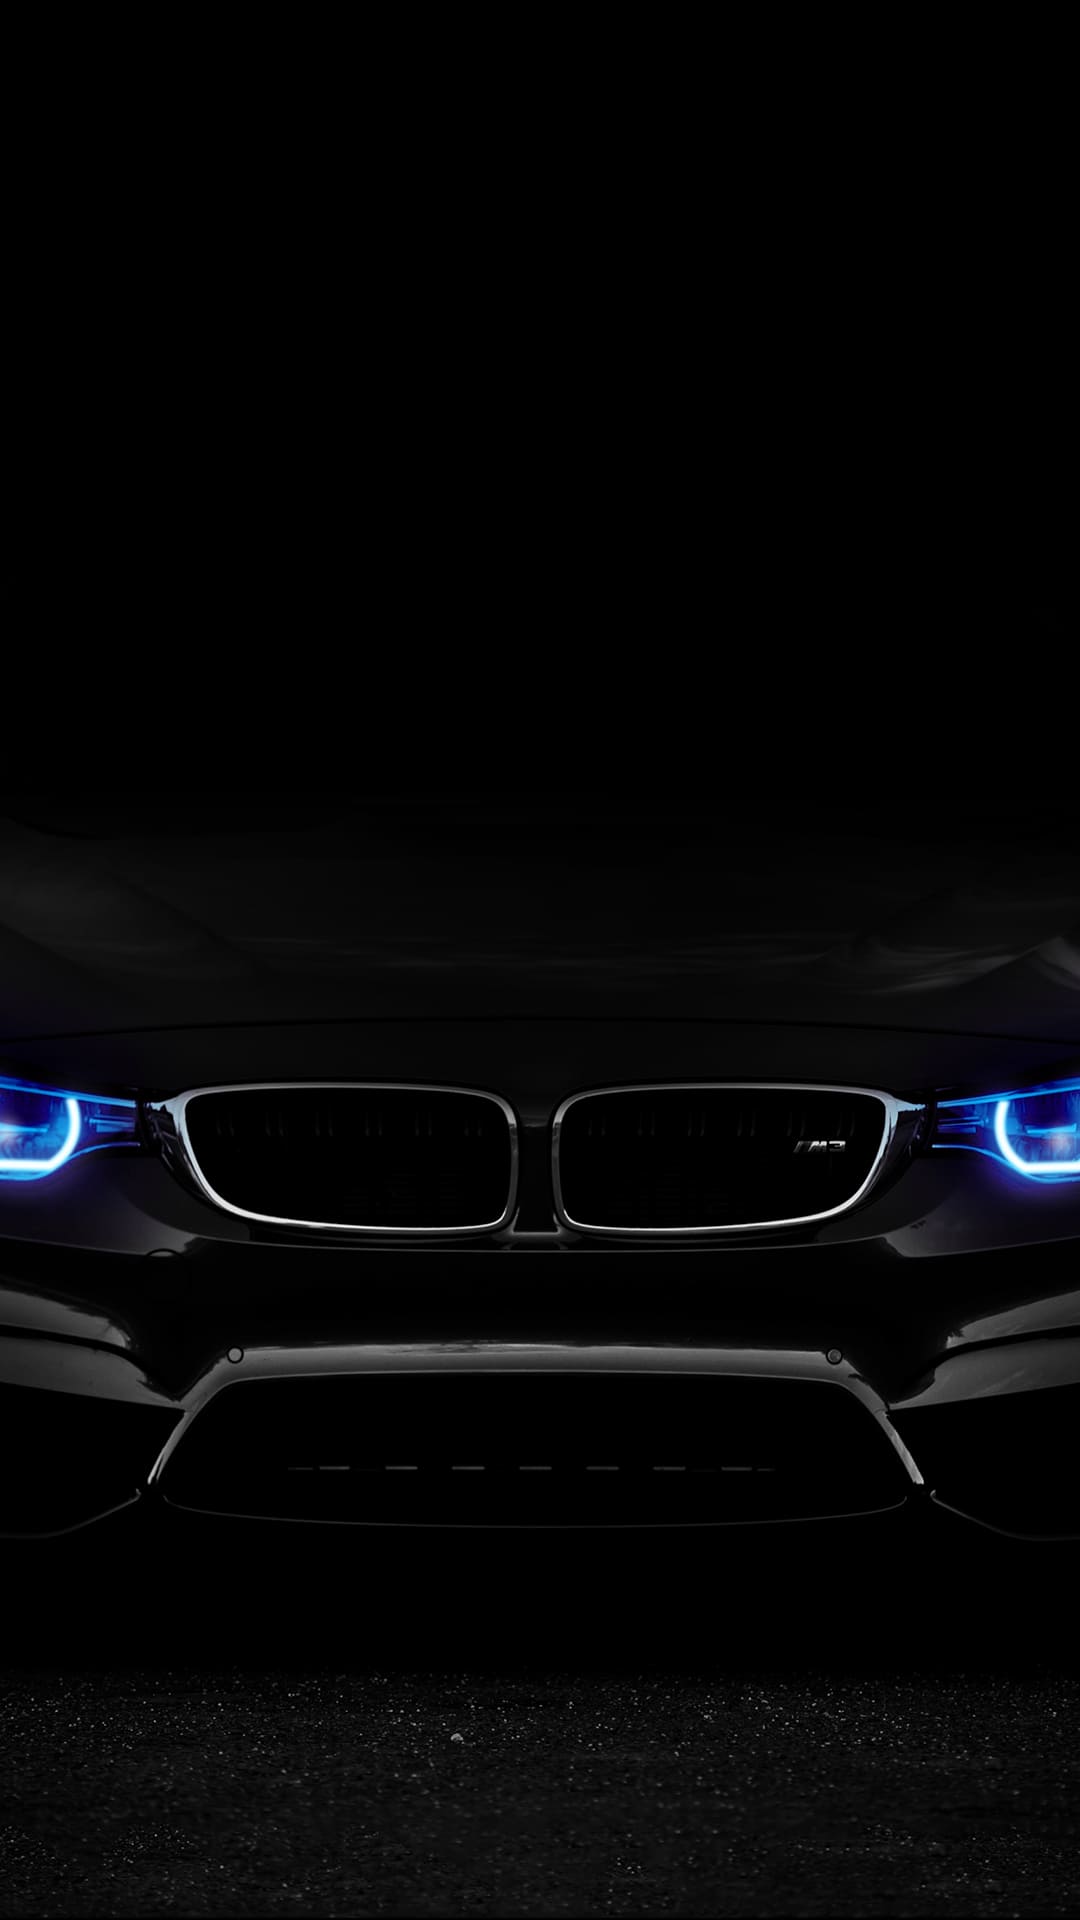 Bmw 3 series 2019 wallpaper for iPhone with high-resolution 1080x1920 pixel. You can use this wallpaper for your iPhone 5, 6, 7, 8, X, XS, XR backgrounds, Mobile Screensaver, or iPad Lock Screen - BMW